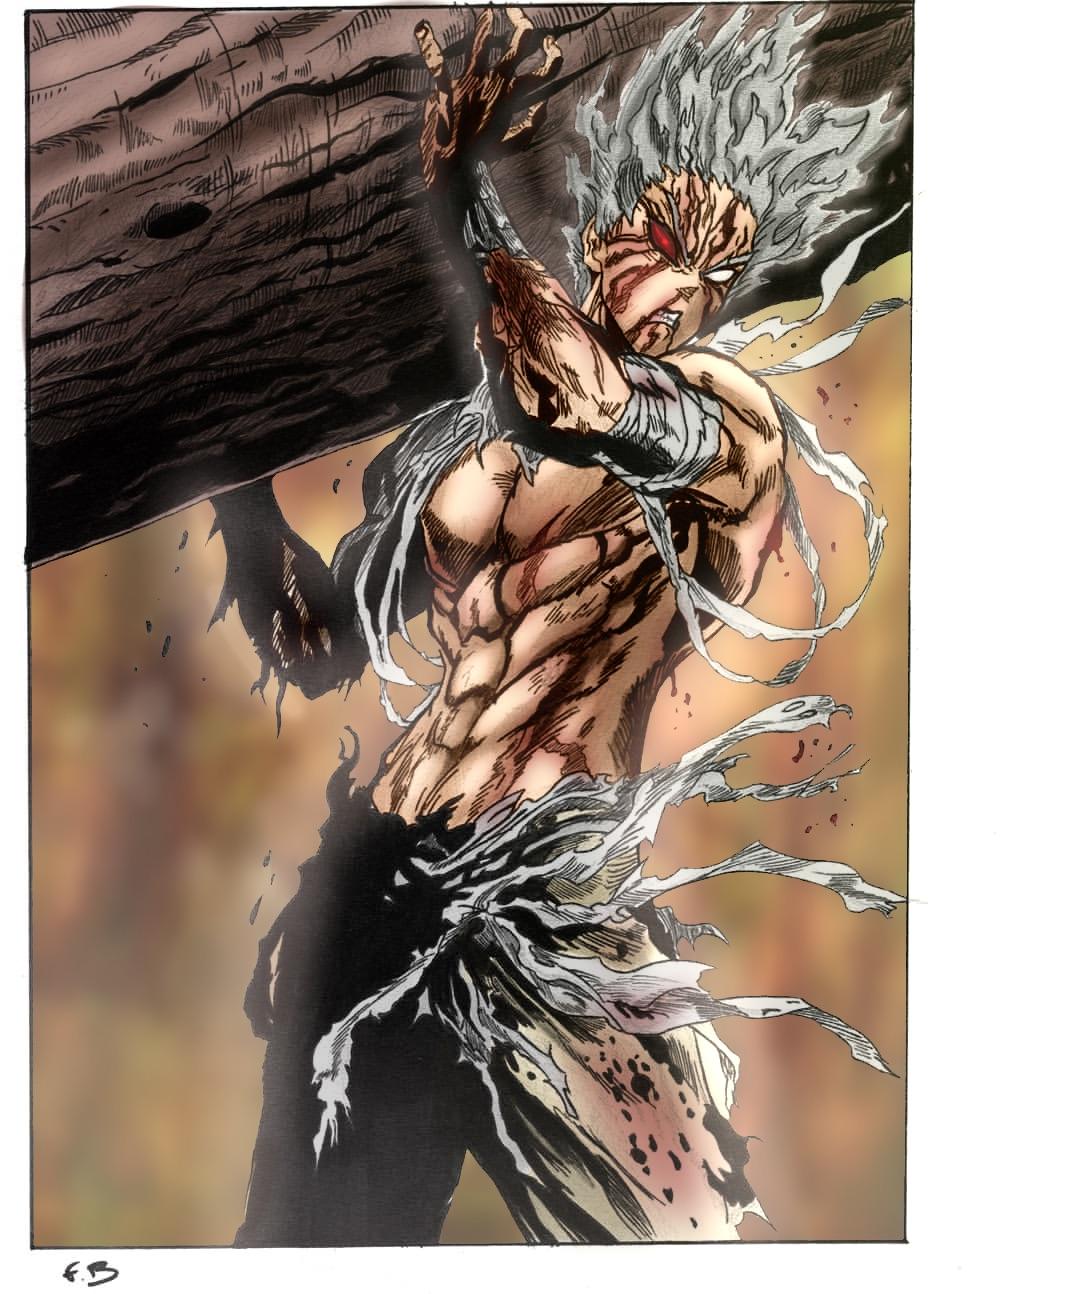 40+ Garou (One-Punch Man) HD Wallpapers and Backgrounds